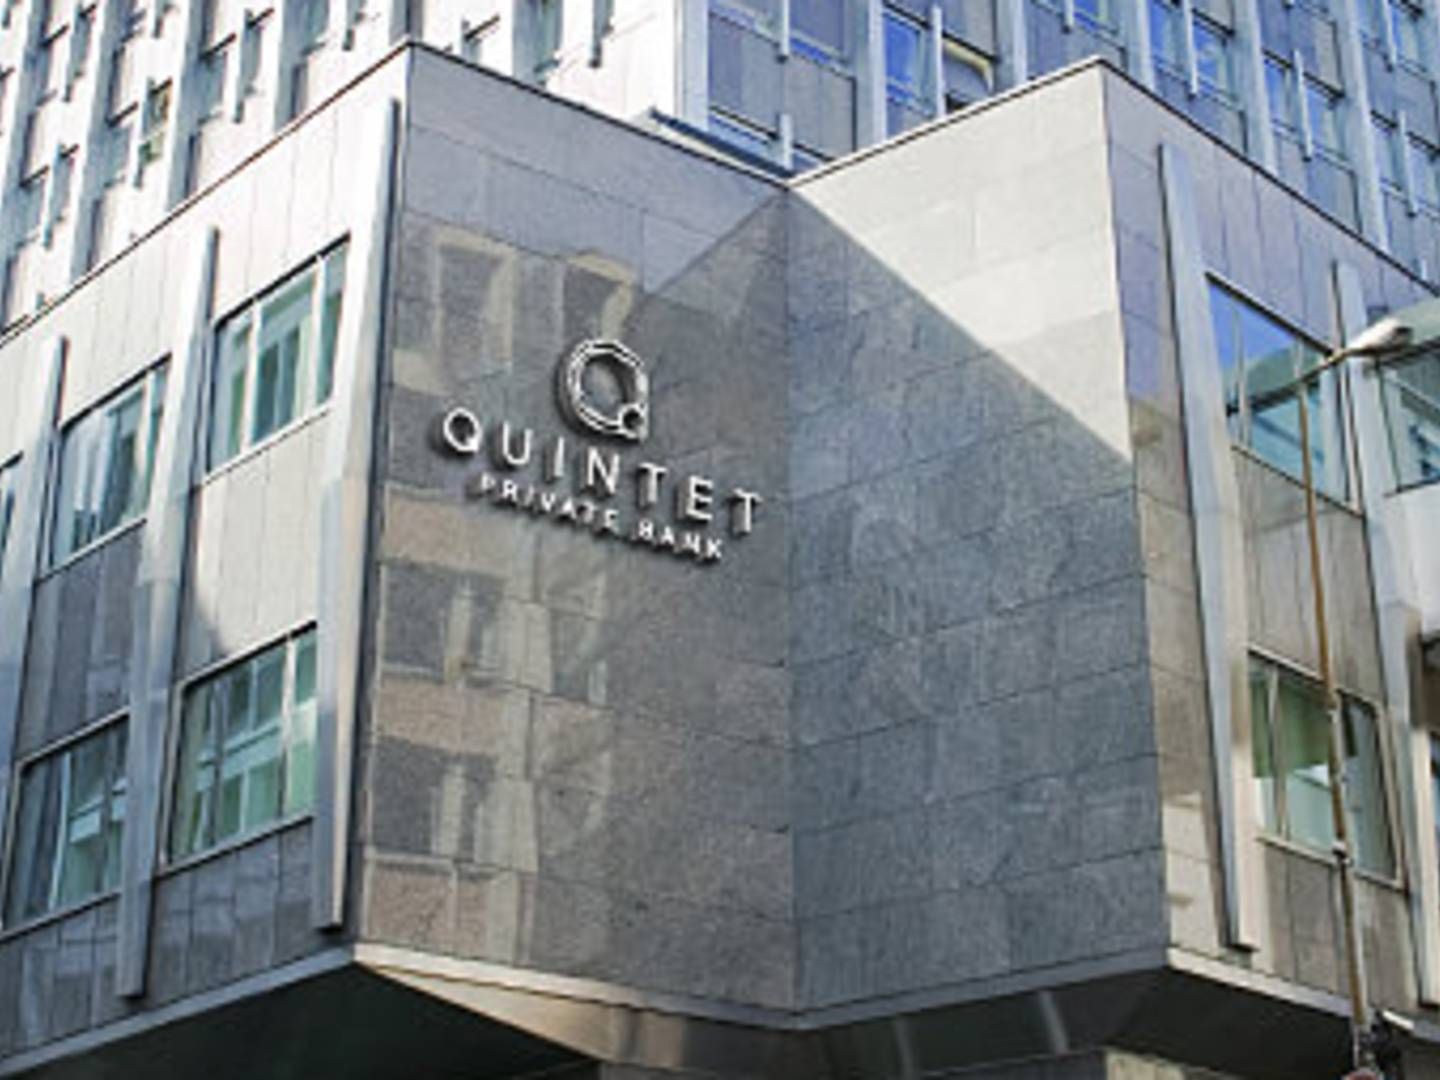 Quintet Private Bank operates in 50 cities across Europe. | Photo: PR / Quintet Private Bank